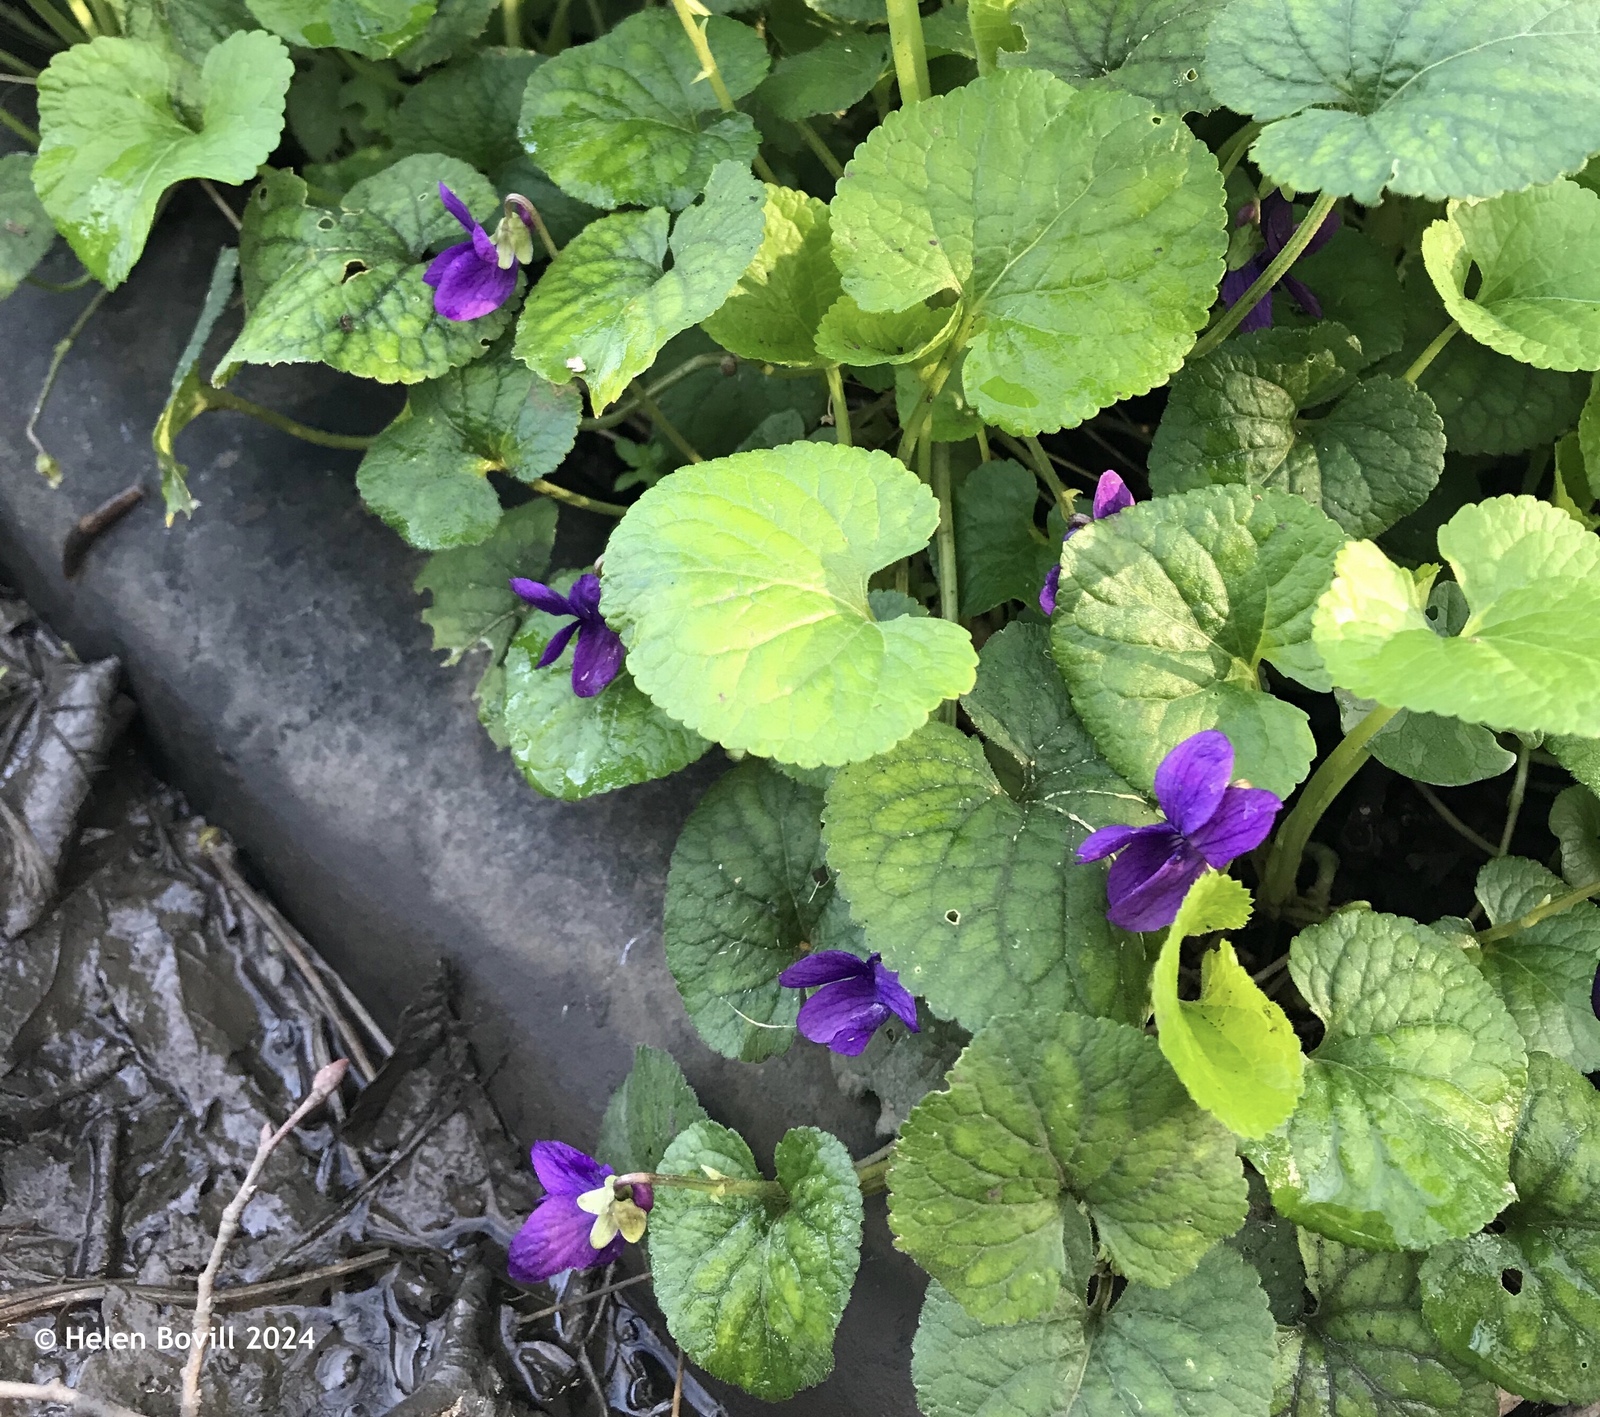 Tiny purple common dog-violets growing on a grave in the cemetery